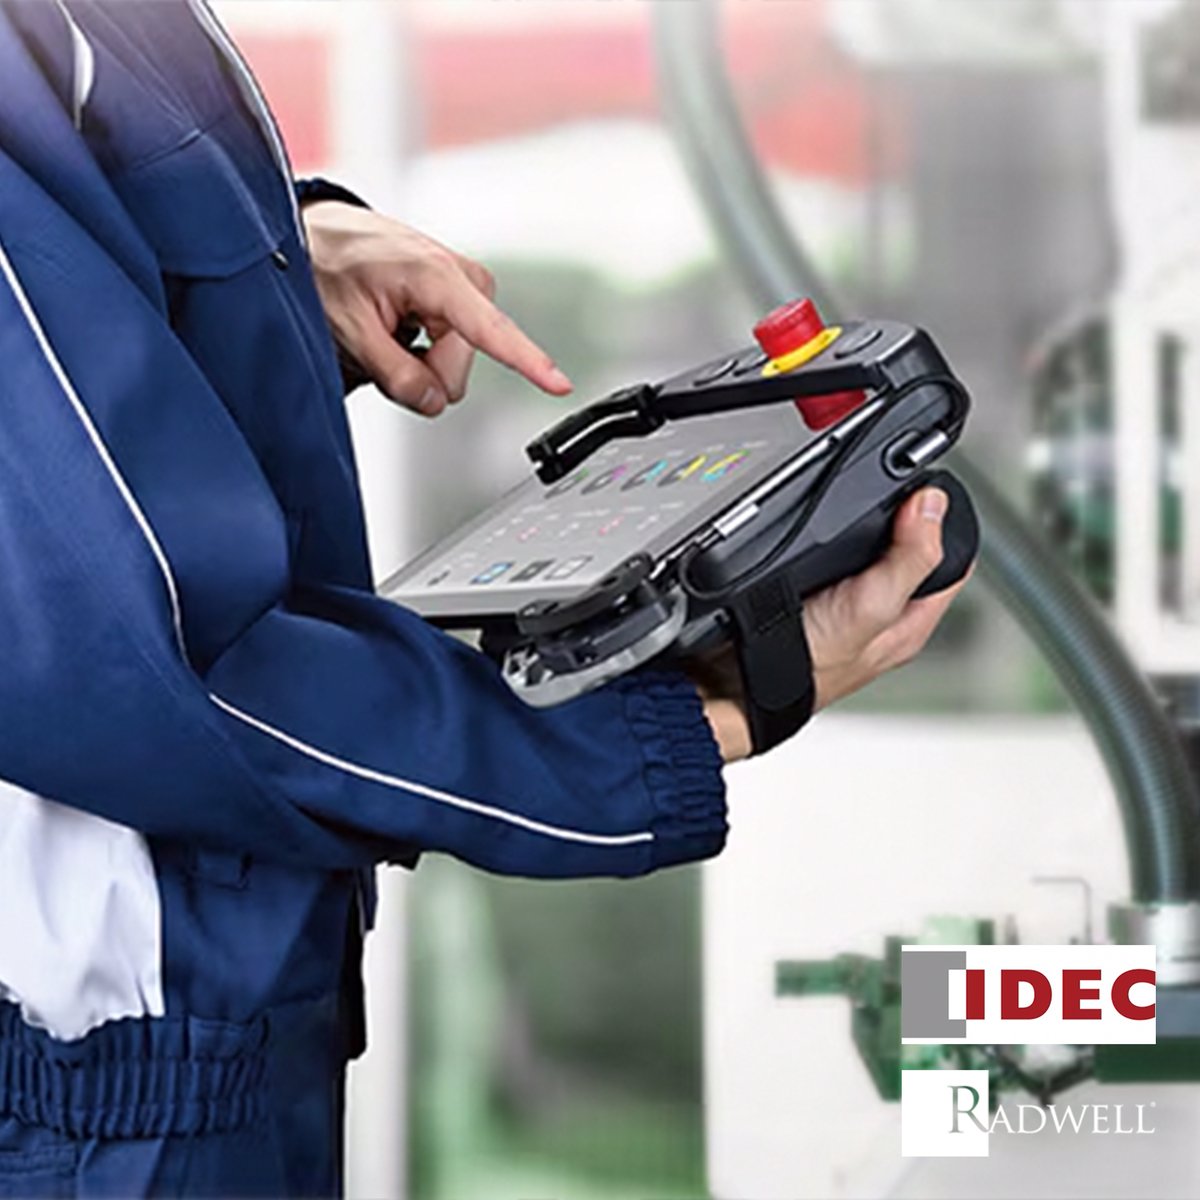 Radwell is an authorized distributor for IDEC. Their purpose is to create the optimum environment for humans and machines. Browse IDEC products now on our website. hubs.ly/Q02r-QPM0 #Radwell #IDEC #AuthorizedDistributor